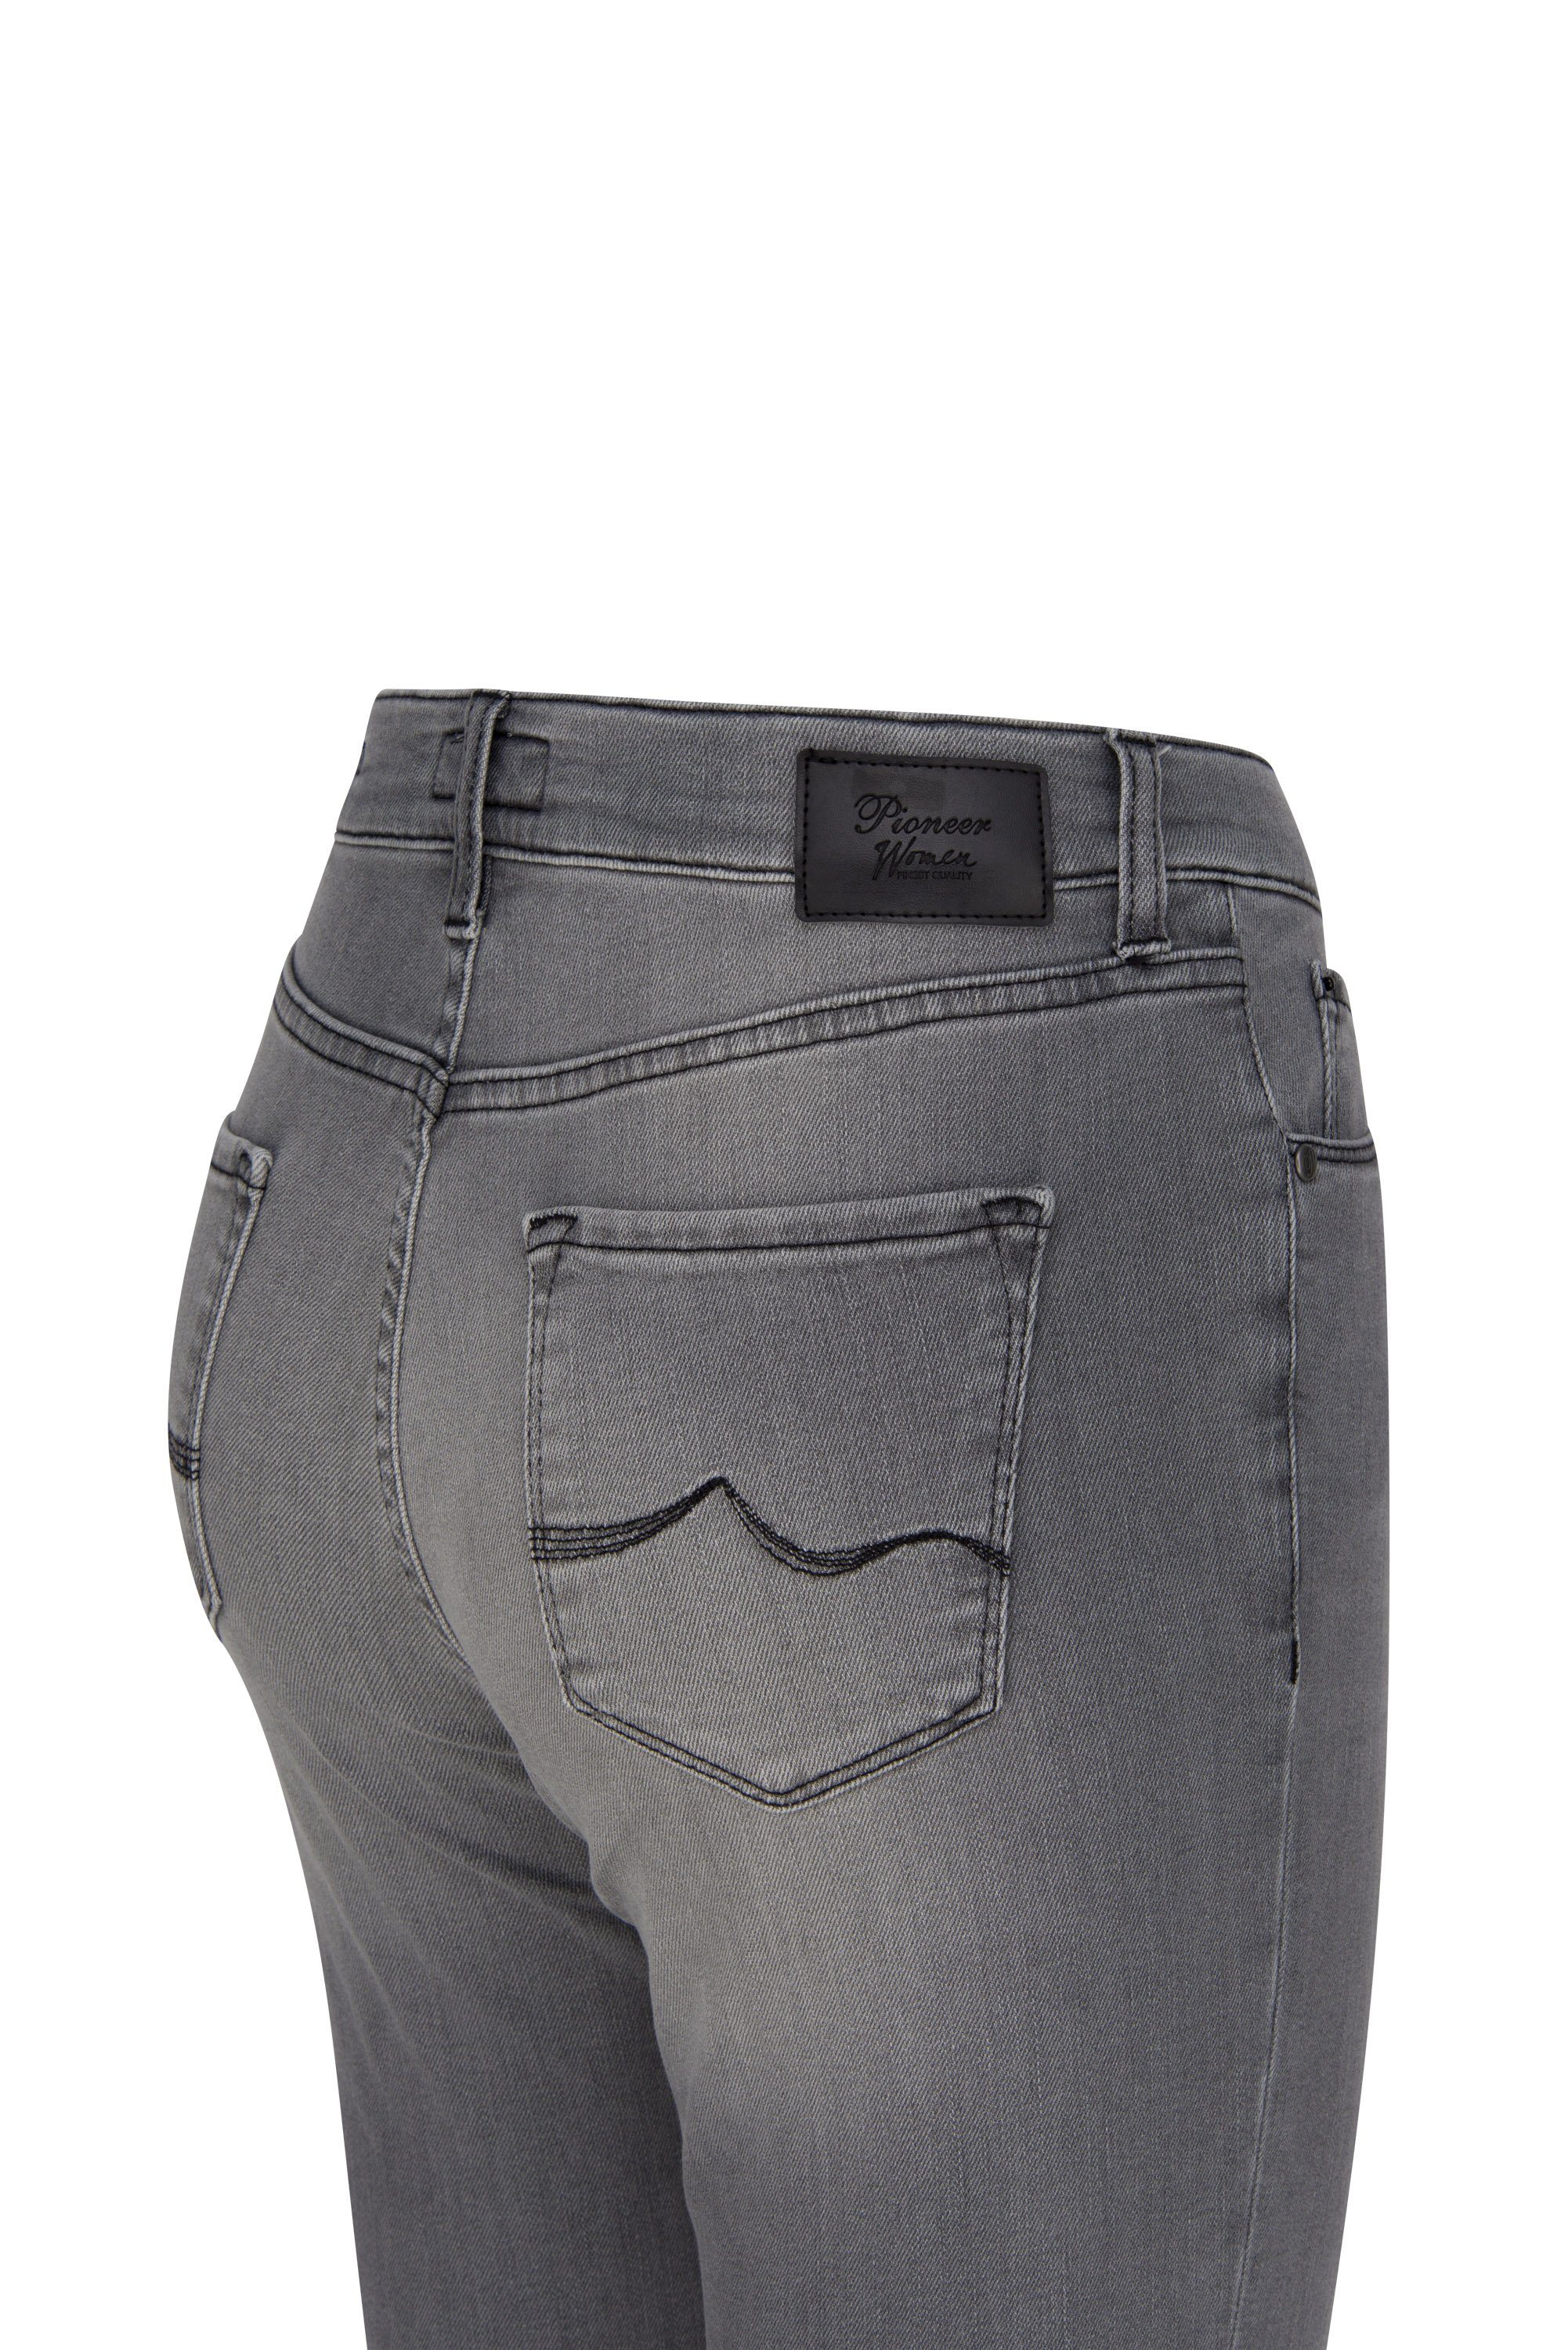 3011 POWERSTRETCH Stretch-Jeans buffies grey KATY used Jeans 5012.9834 - Pioneer Authentic PIONEER